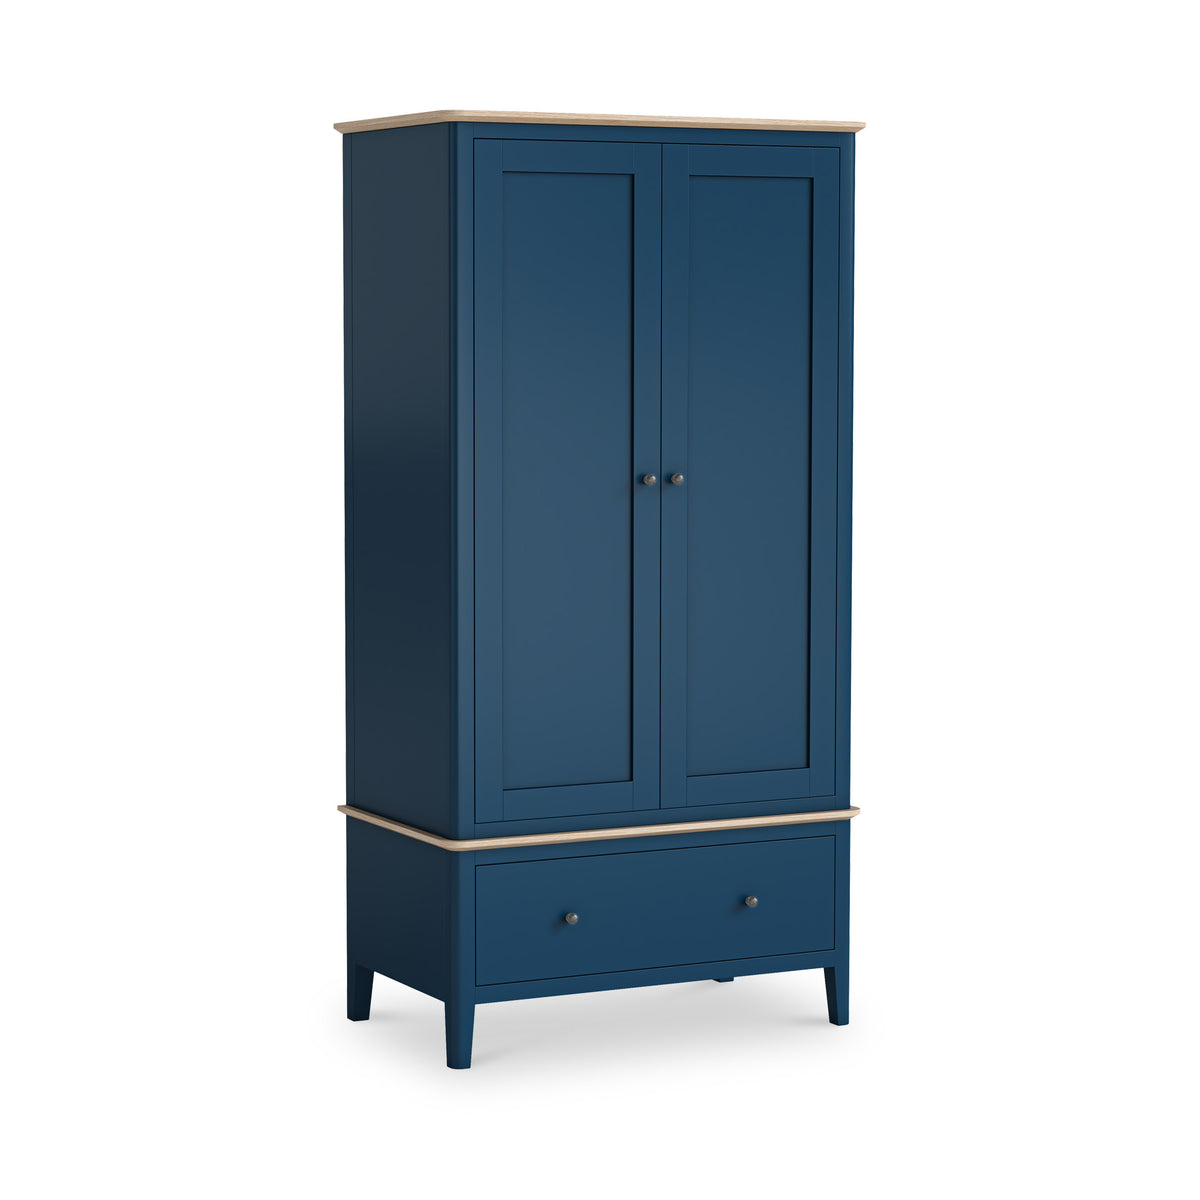 Penrose Navy Blue Gents Wardrobe with metal handles from Roseland Furniture